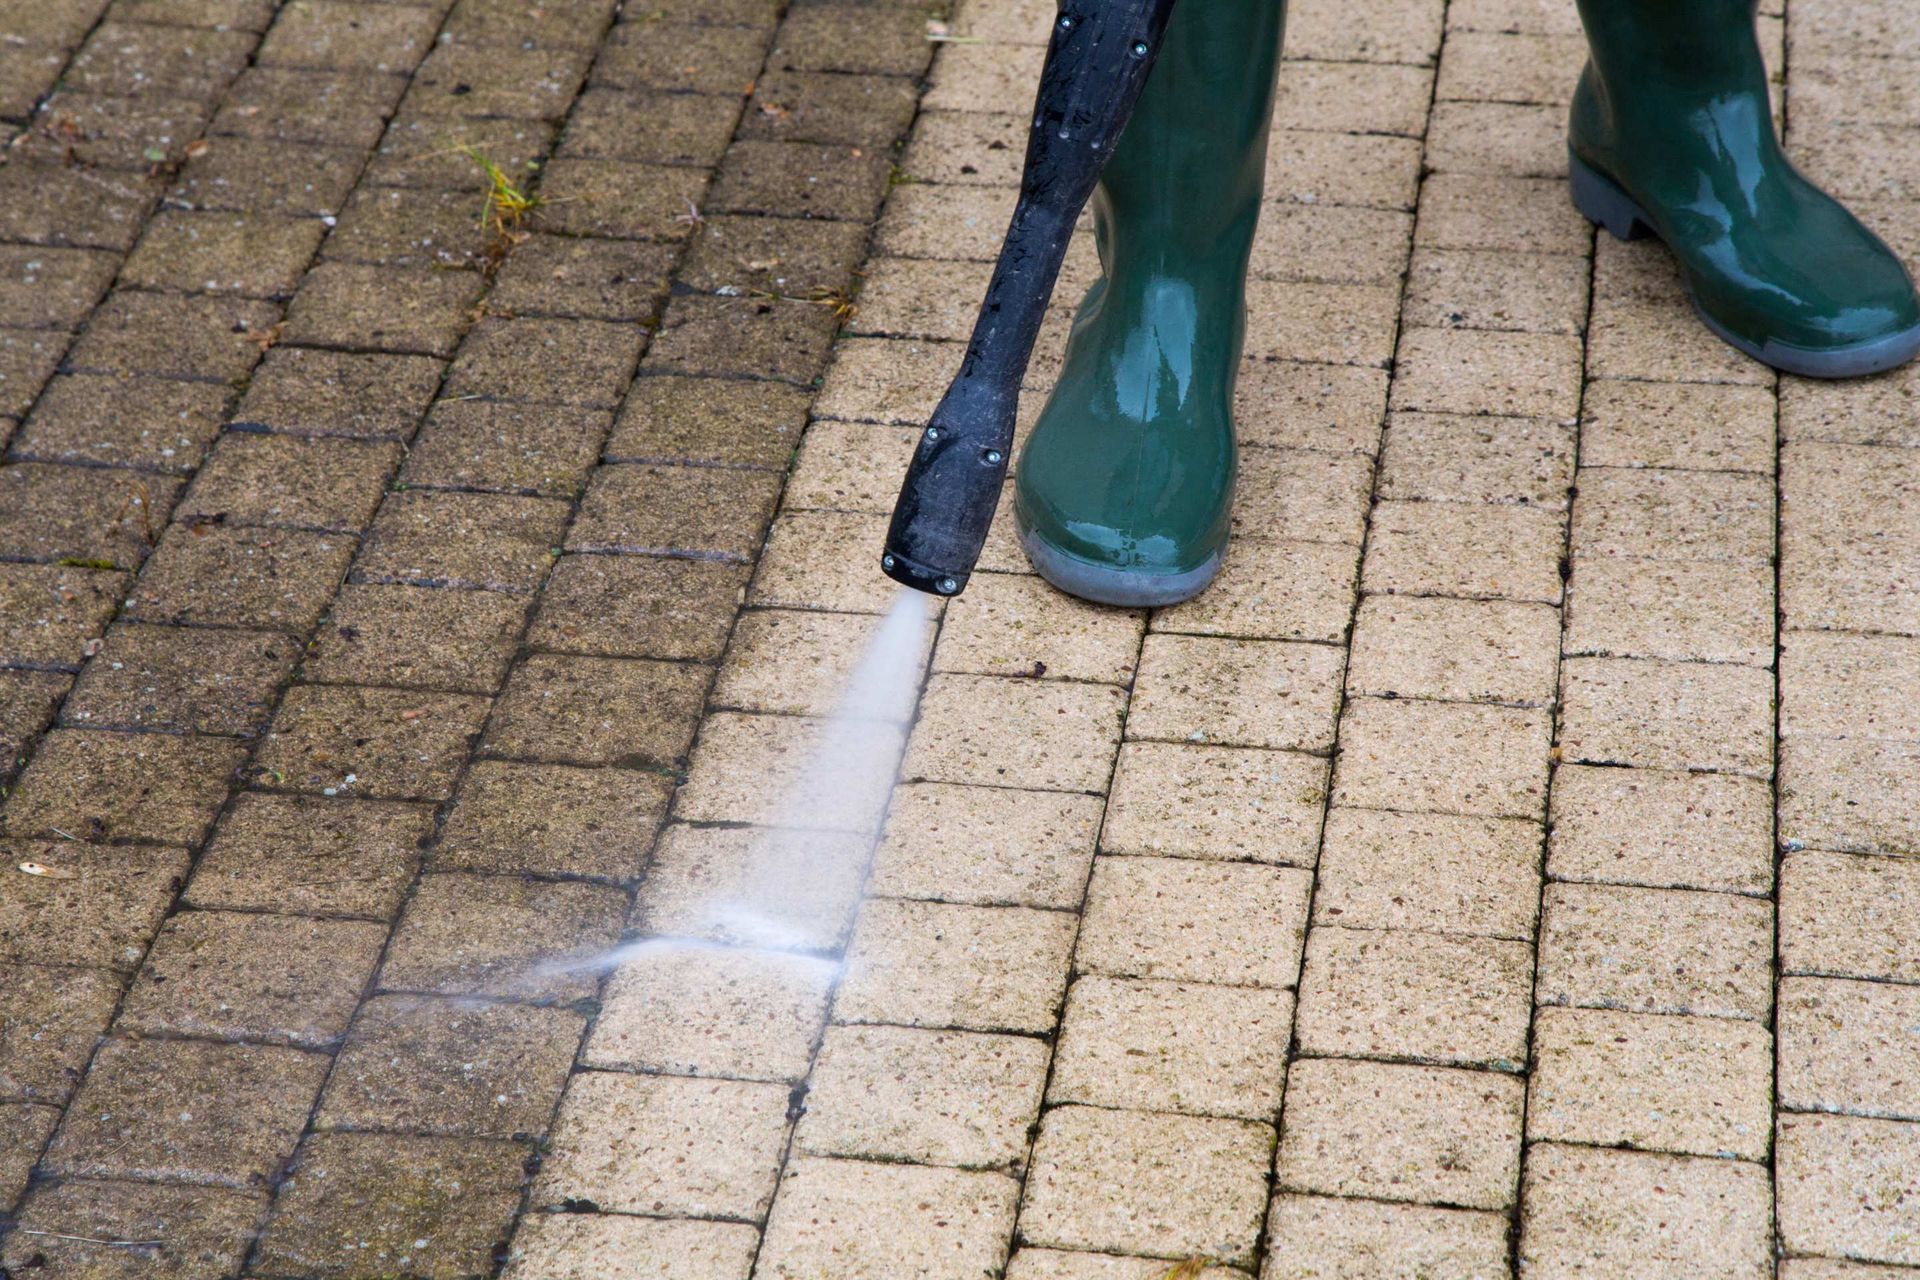 a pressure washer is used to clean off stains and dirt the stamped concrete surface